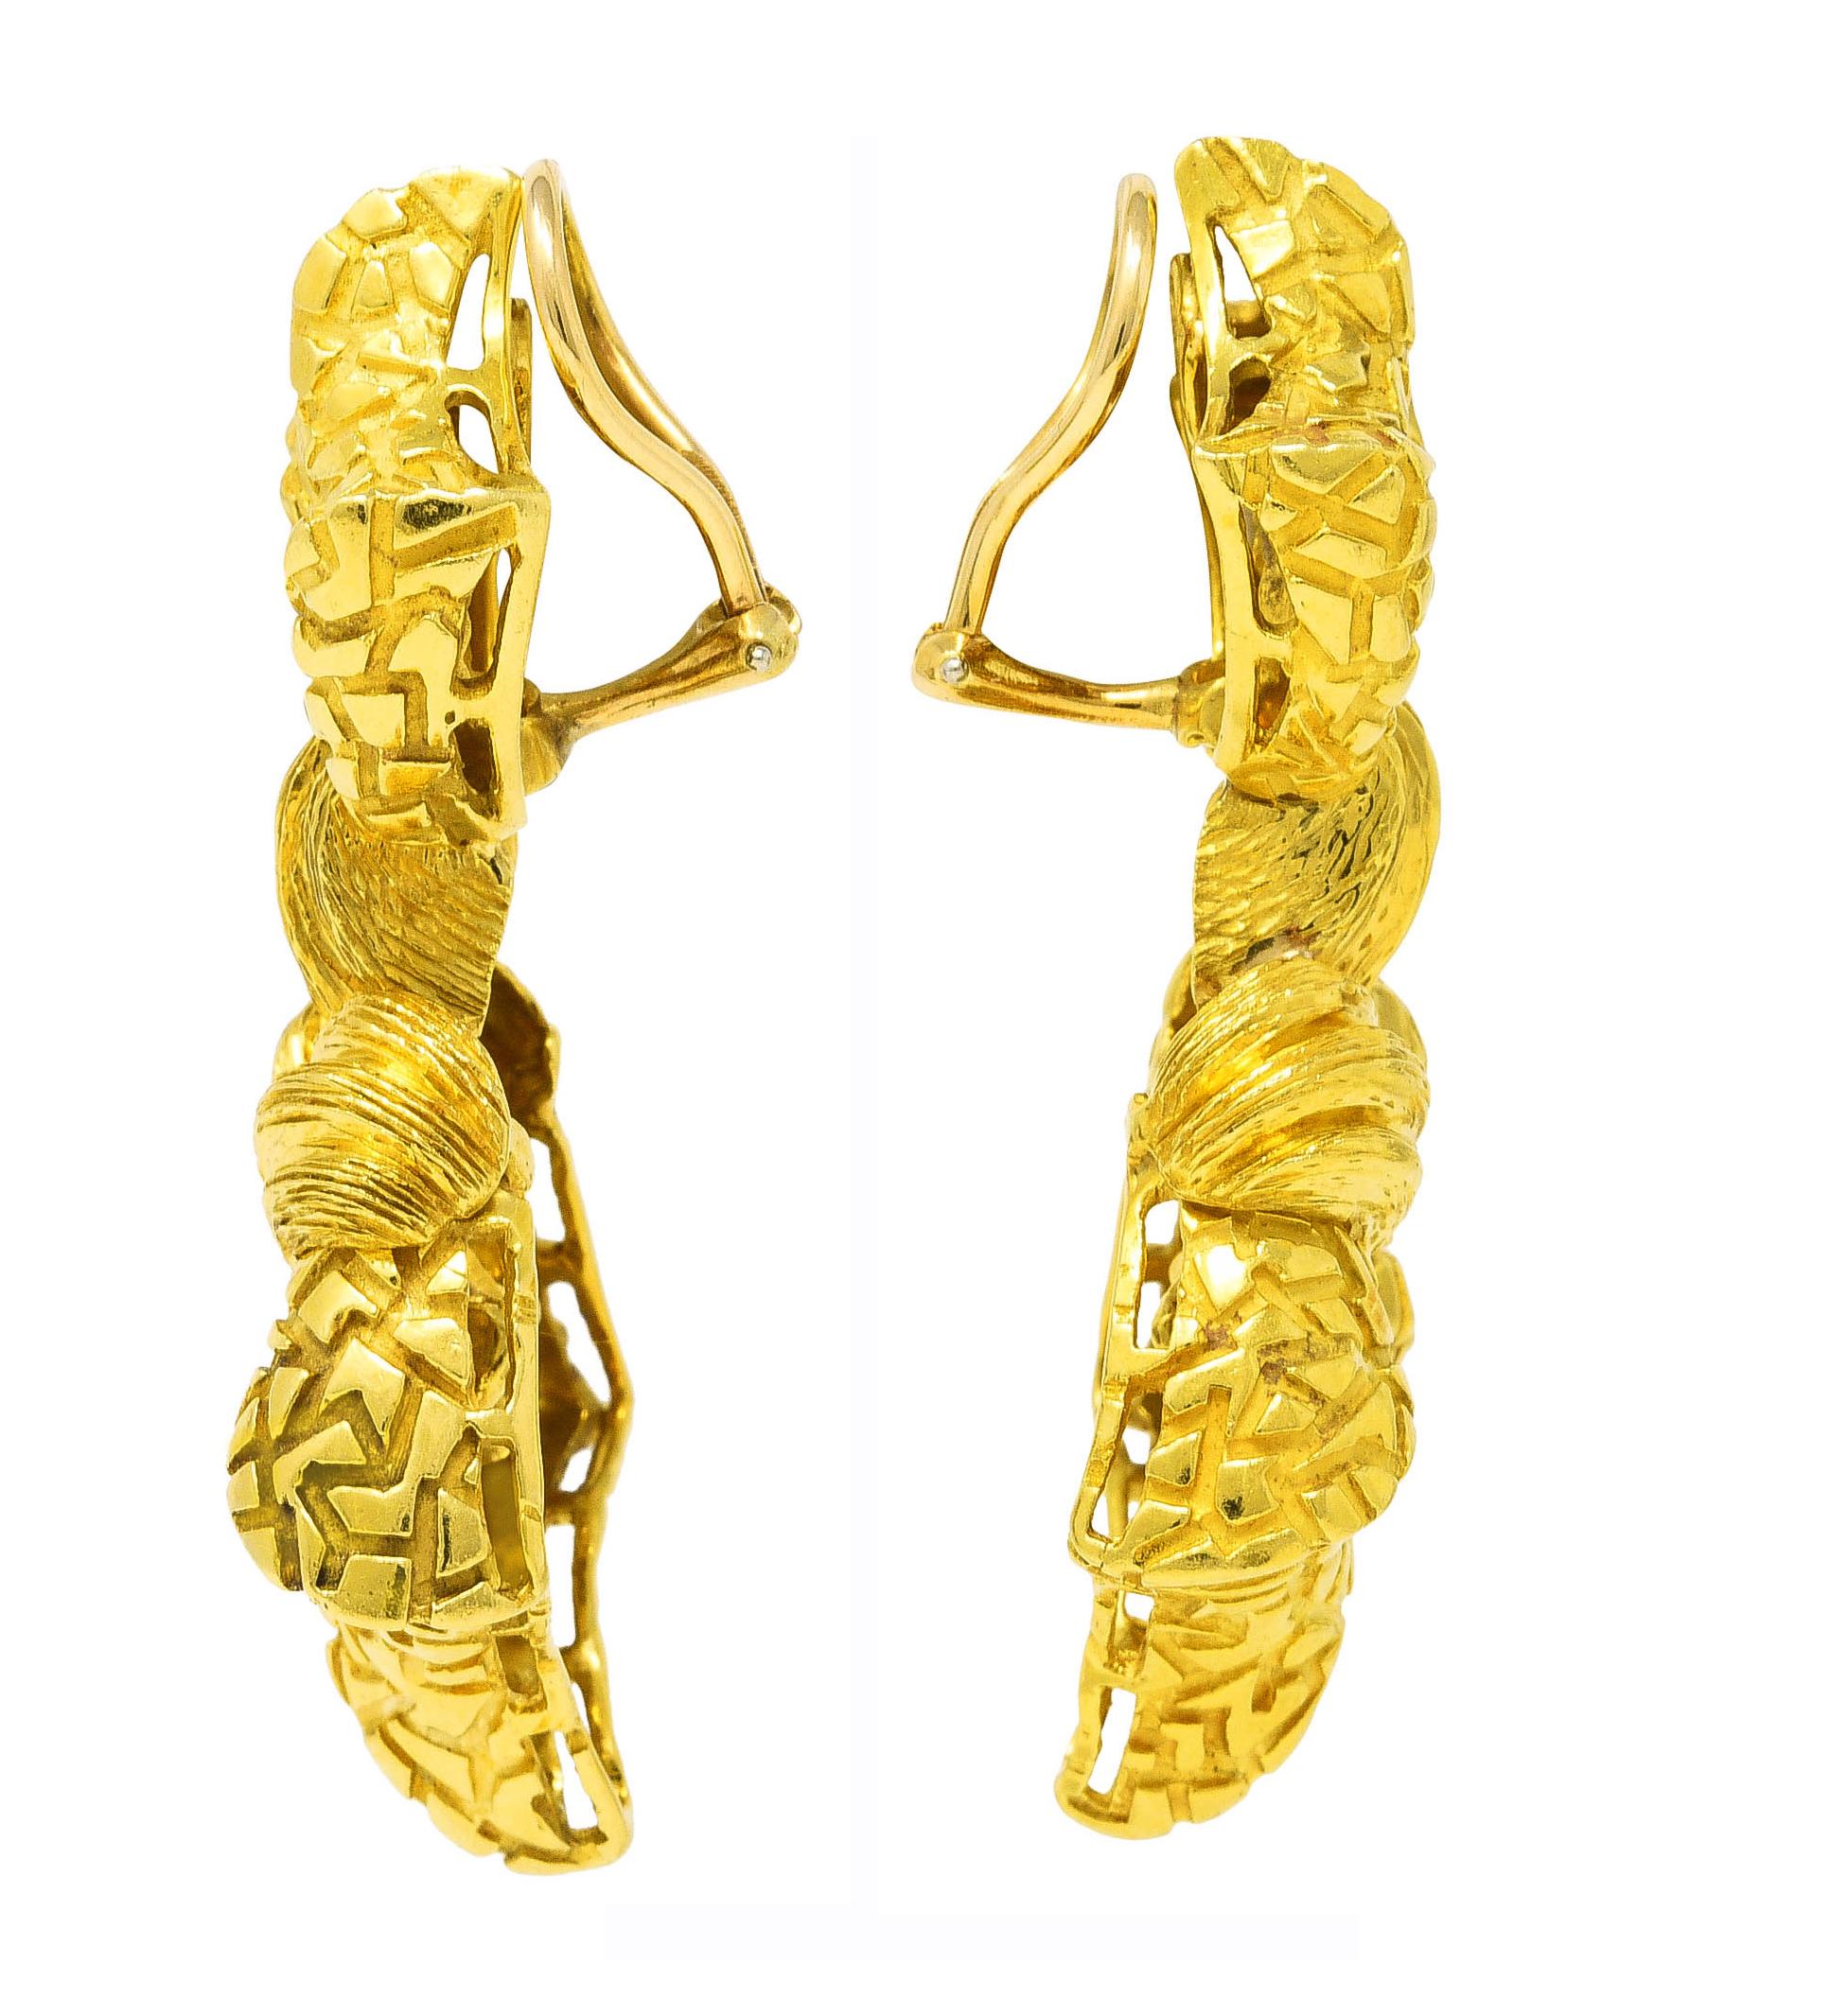 Ear-clip earrings are designed as two faceted geometric forms with cracked motif throughout

Featuring sweeping brushed gold motif connecting both forms

Completed by hinged omega backs

Stamped 18k for 18 karat gold

With maker's mark for Henry